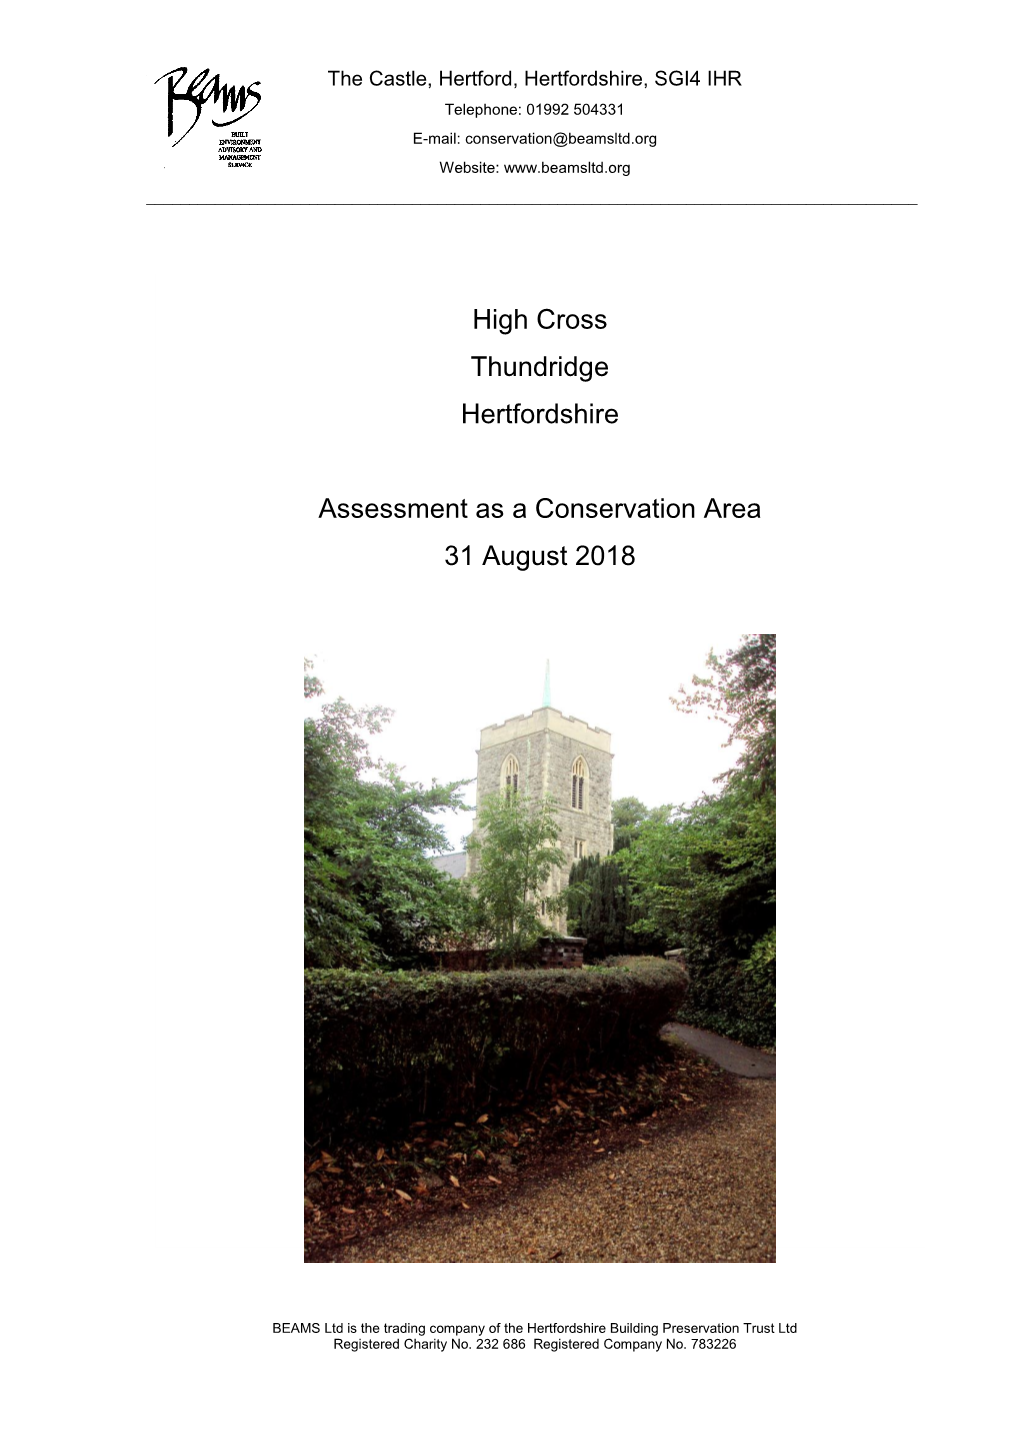 Assessment of High Cross As a Conservation Area BEAMS